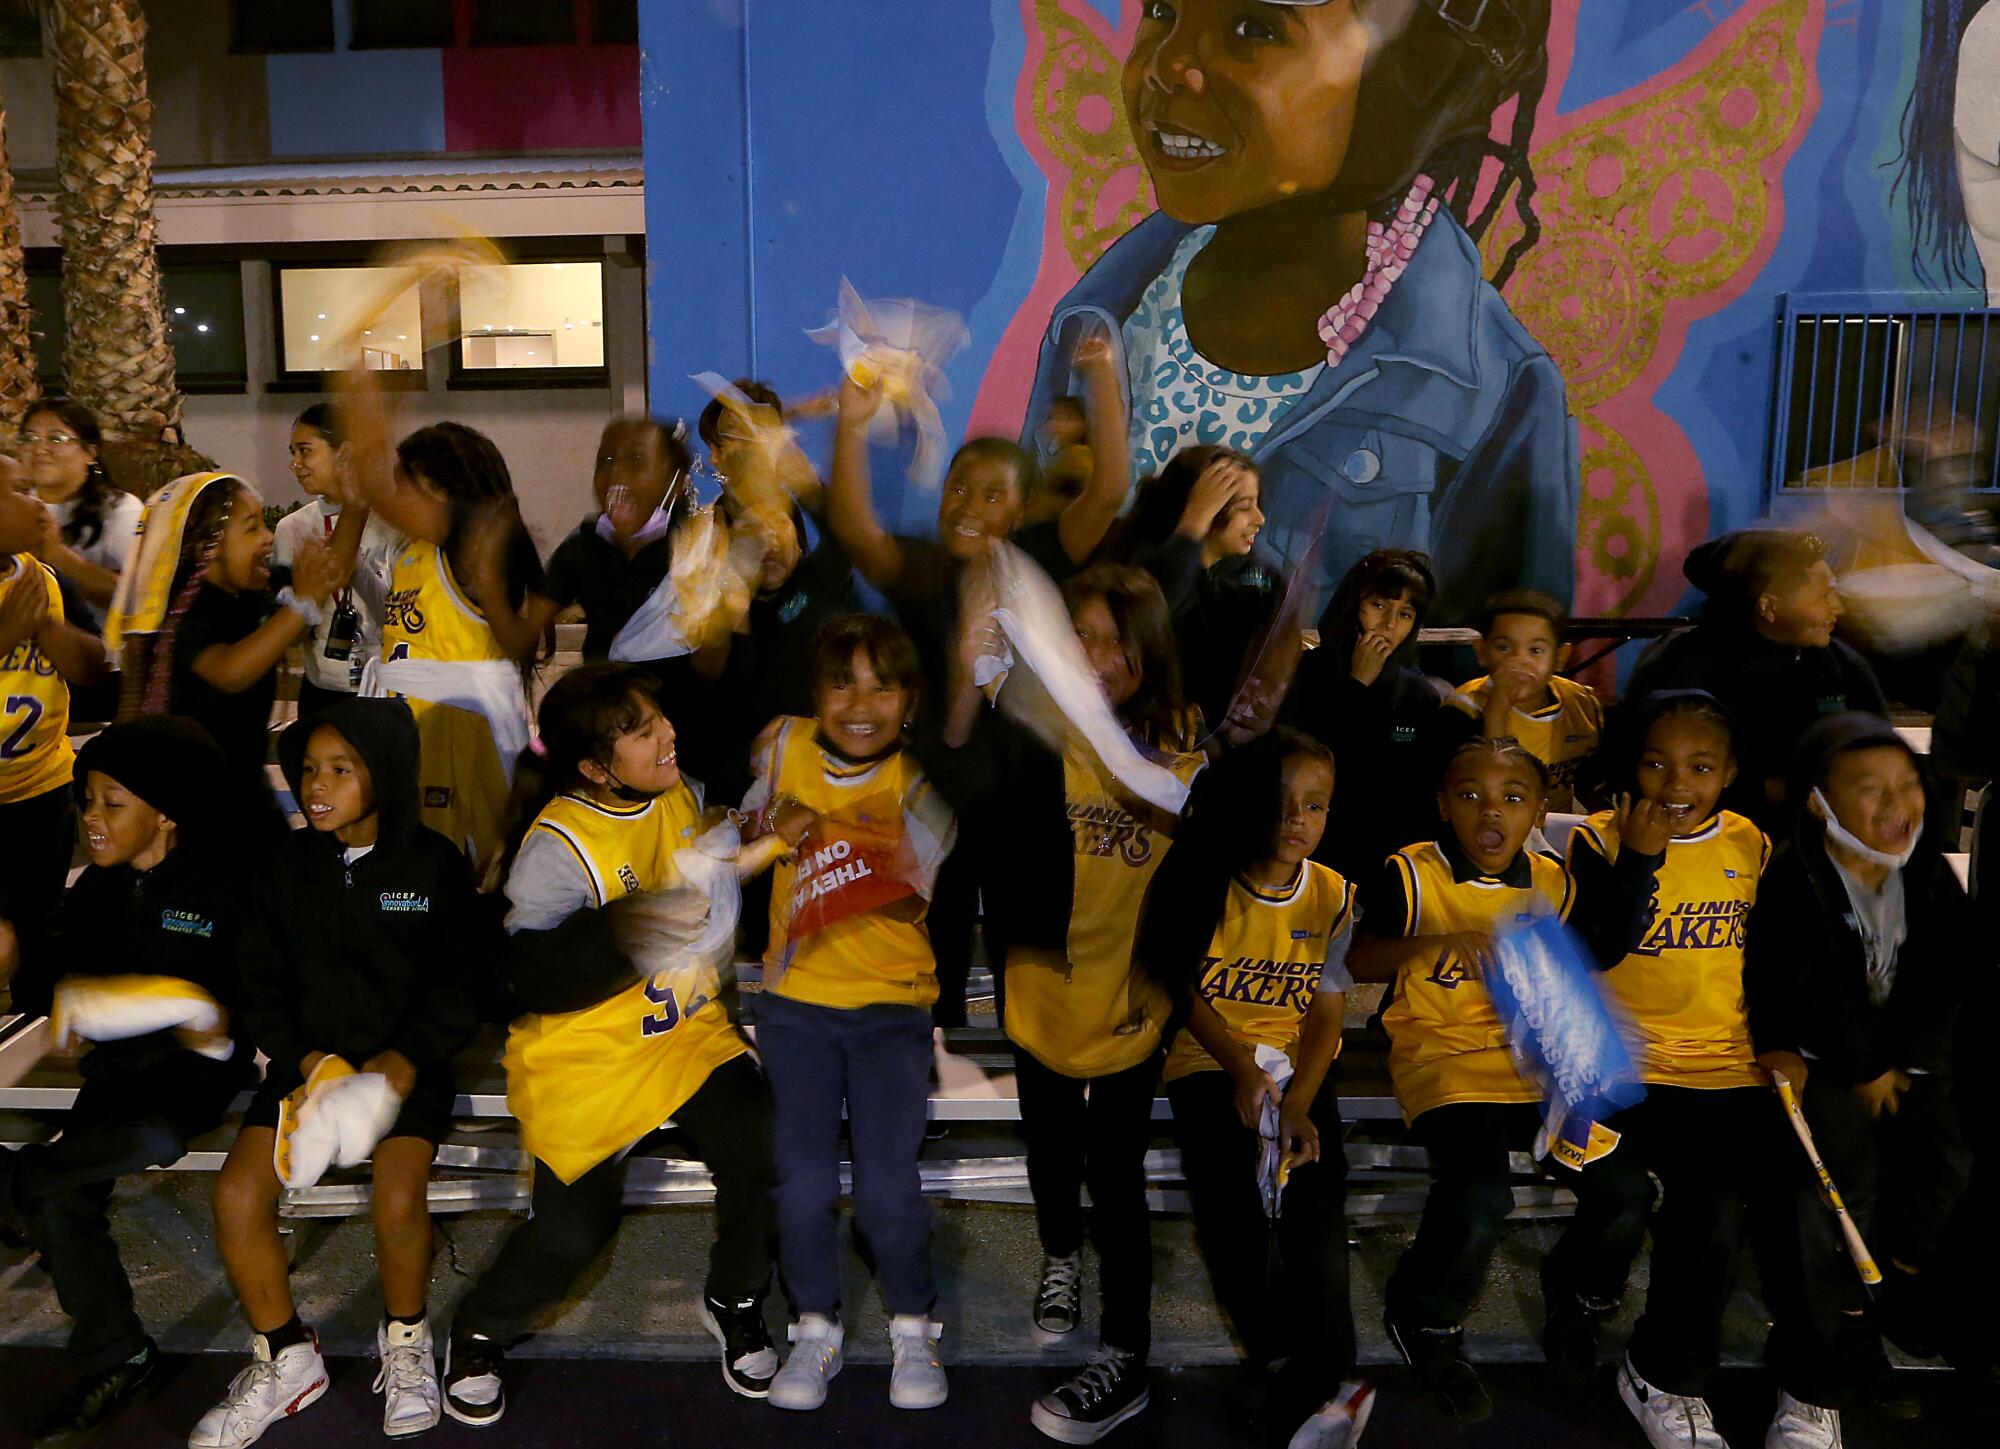 A group of children cheer during the unveiling of a new basktball court at the Challengers Boys & Girls Club.